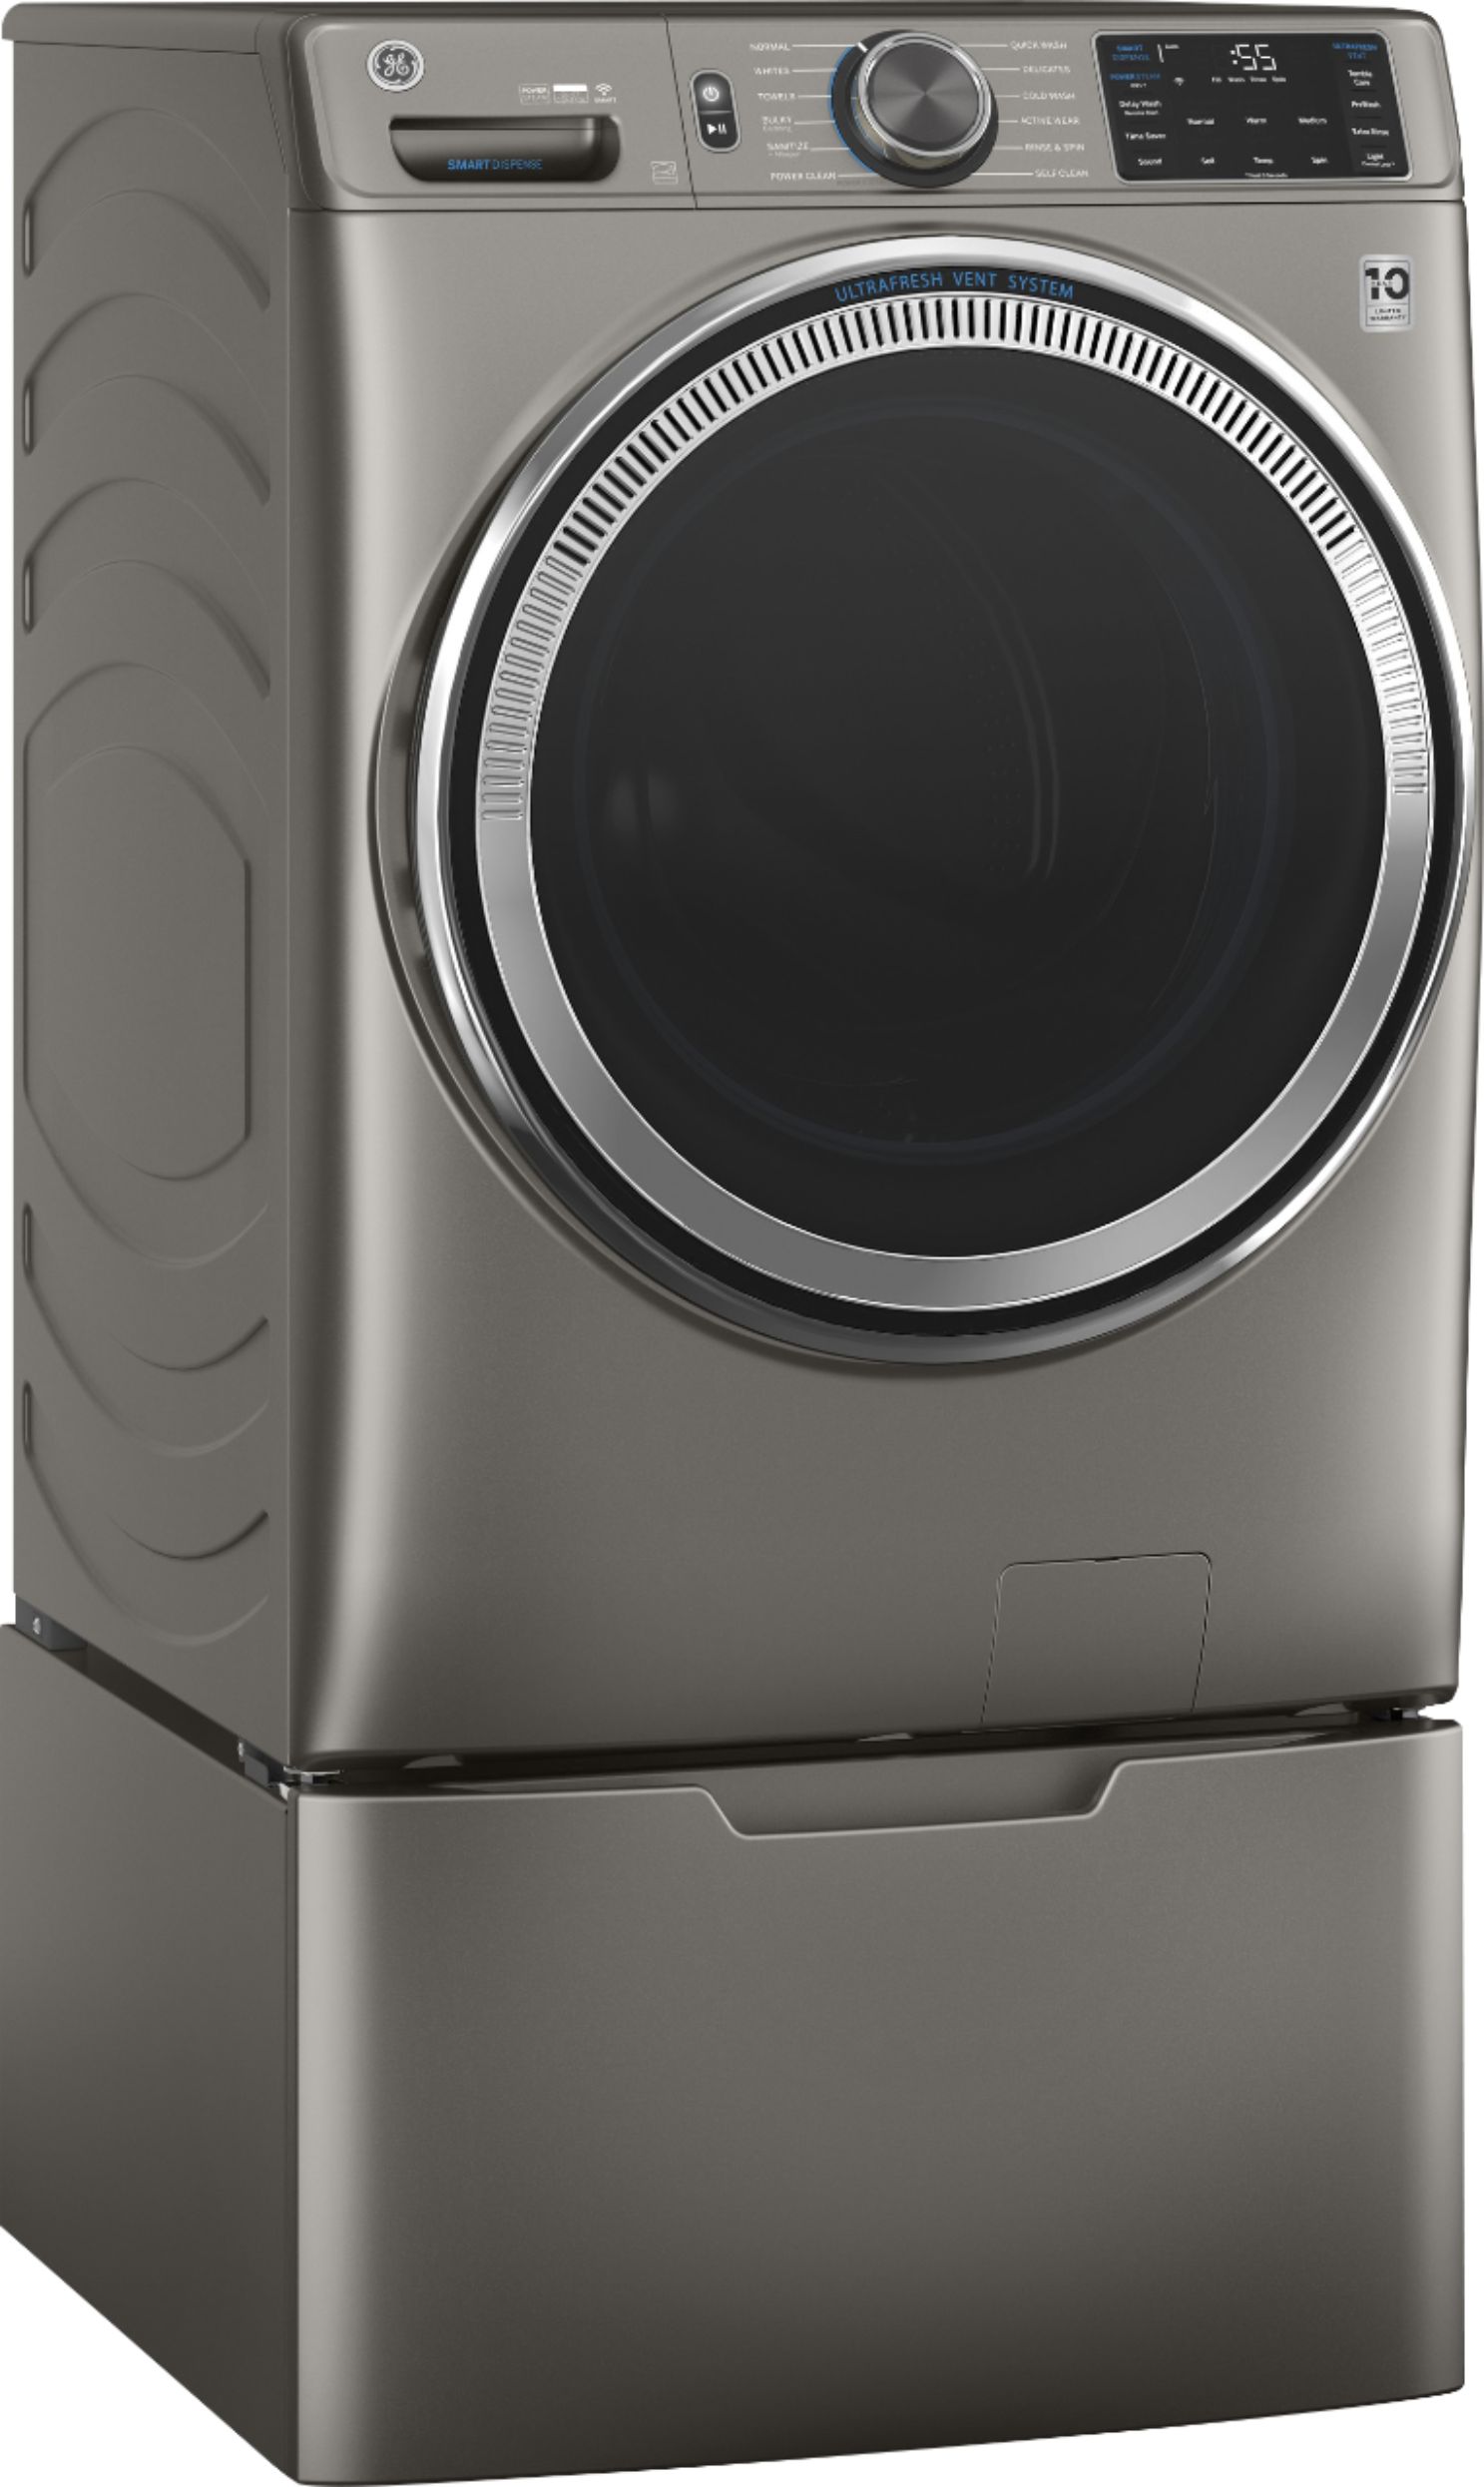 Angle View: Samsung - 4.5 cu. ft. Large Capacity Smart Dial Front Load Washer with Super Speed Wash - Brushed black